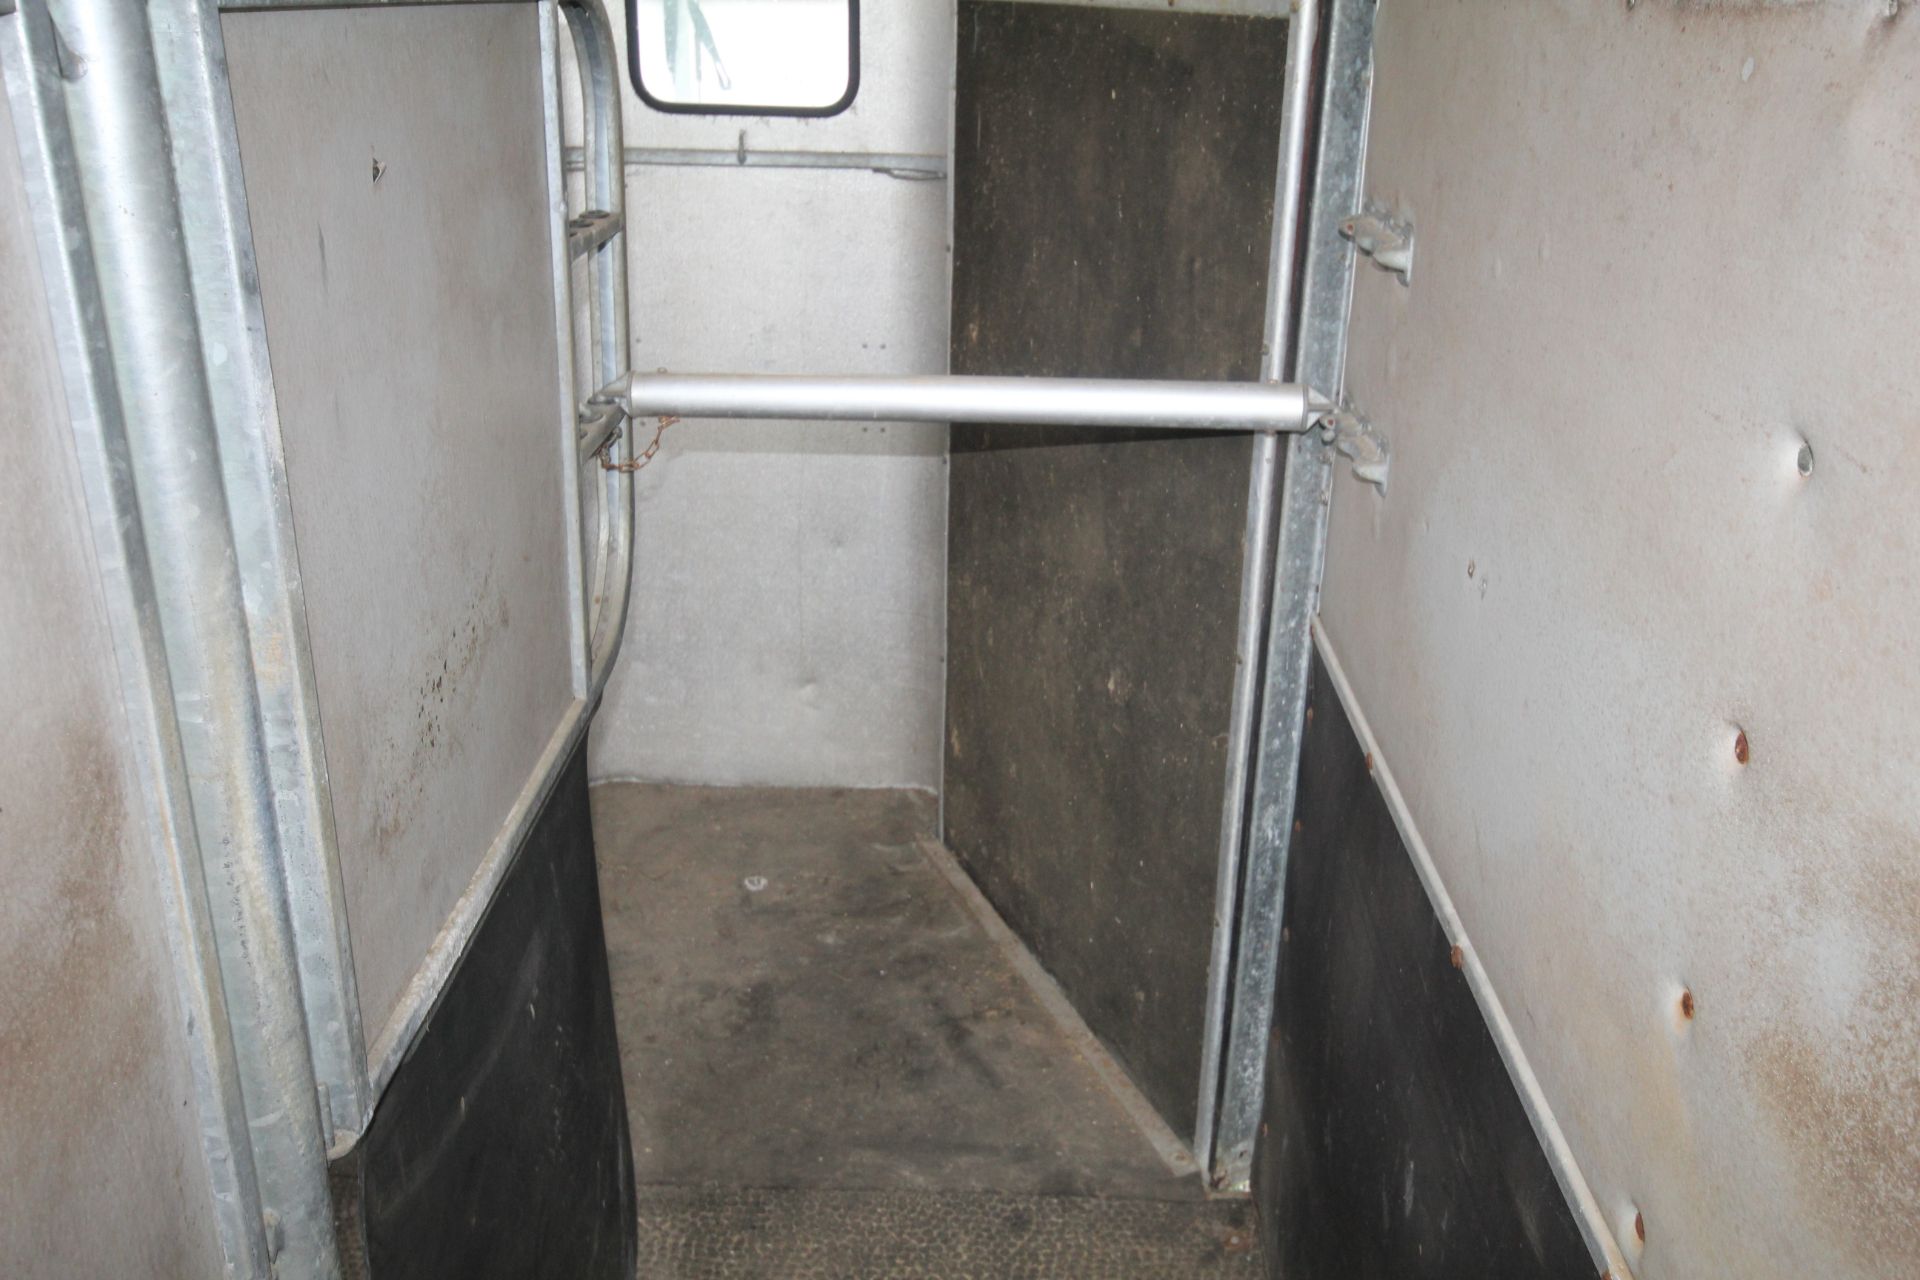 Ifor Williams 505 two horse twin axle horsebox. Recent new floor fitted by main dealer. - Image 32 of 44